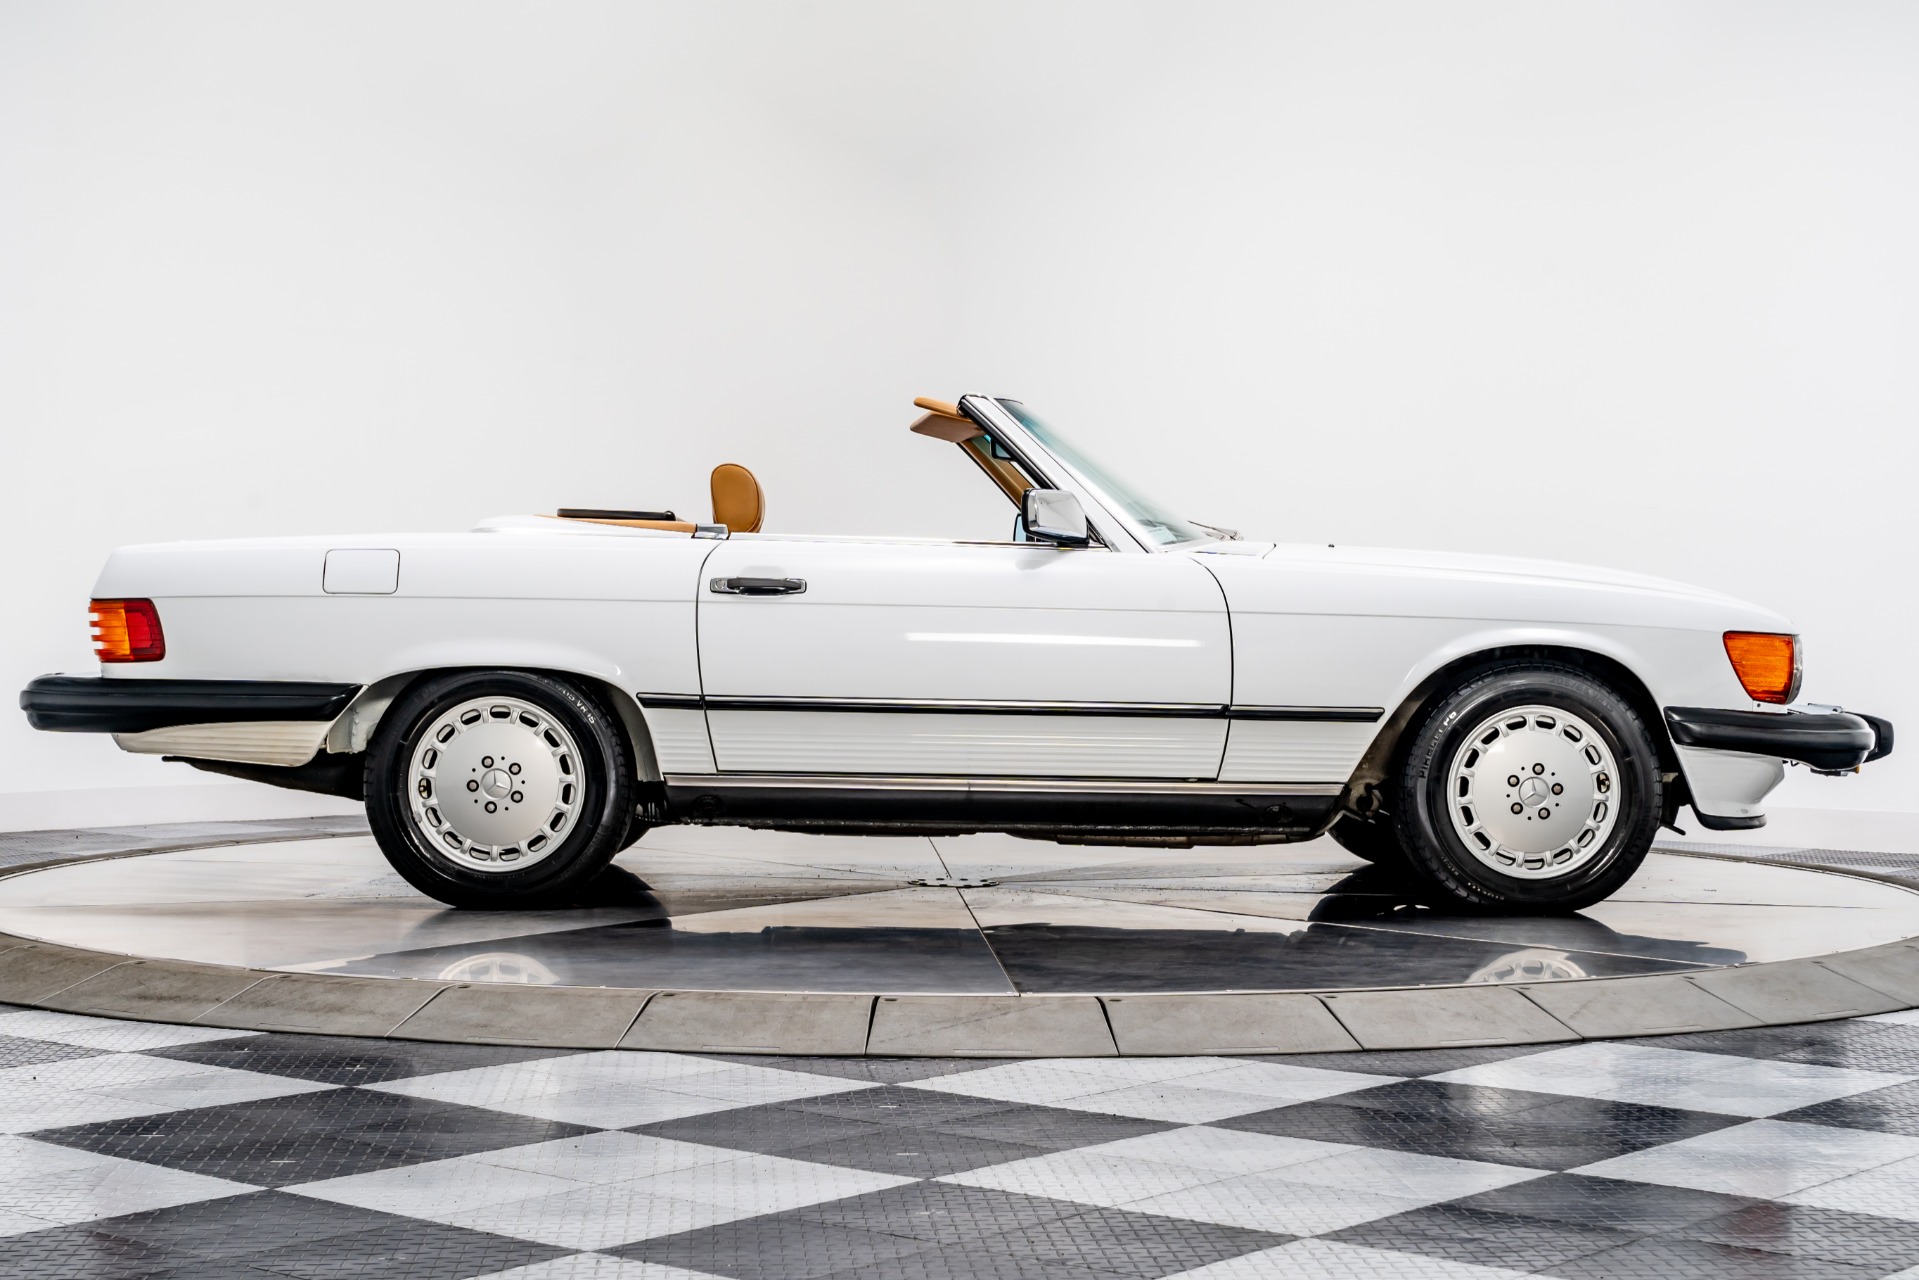 Used 1989 Mercedes Benz 560 Sl For Sale 78 900 Marshall Goldman Motor Sales Stock W560slwp